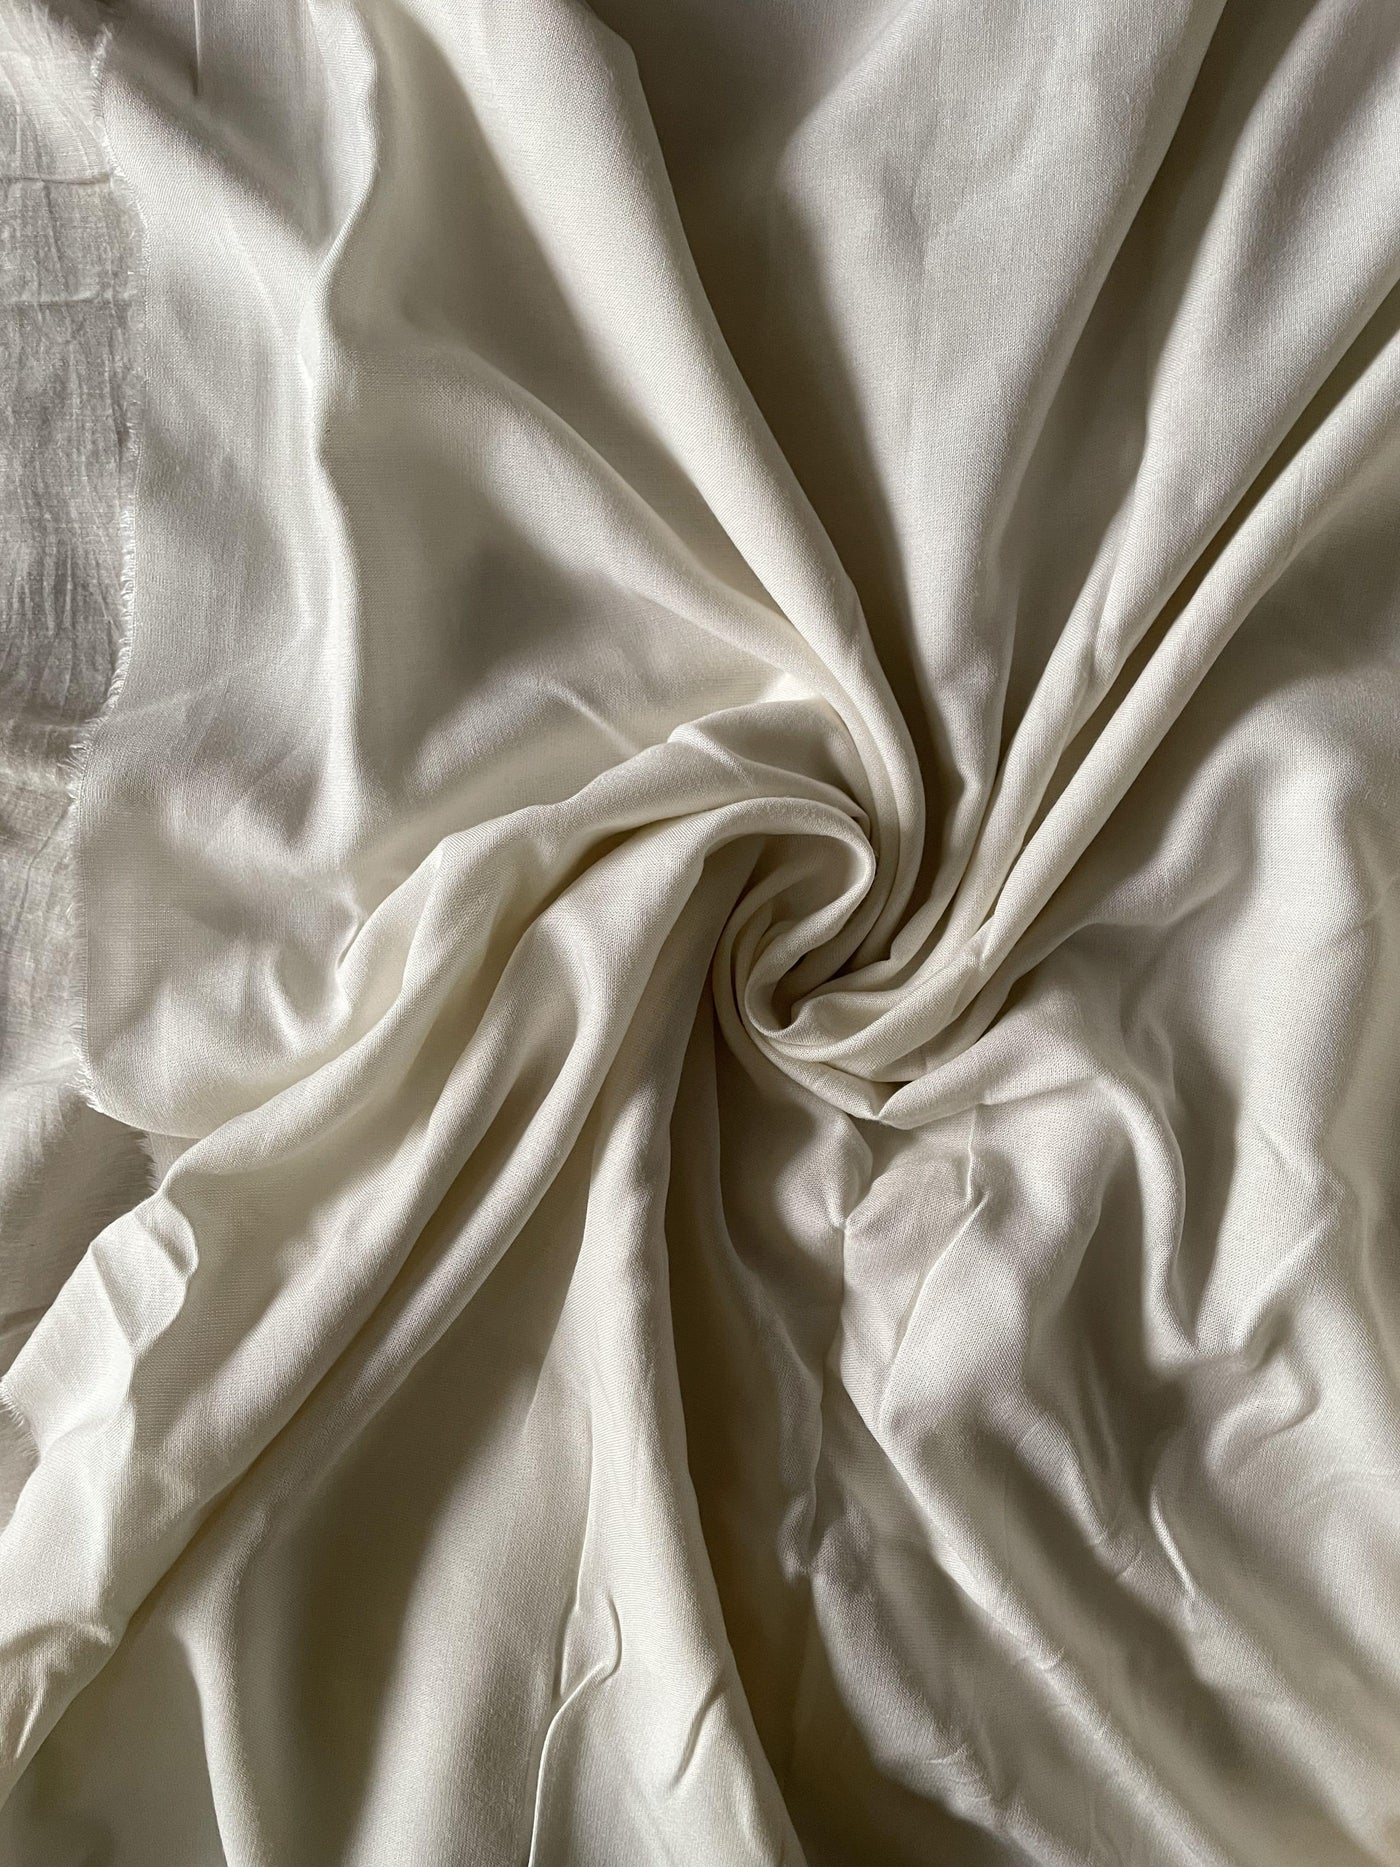 Essentials by Fabric Pandit Fabric Pearl White Color Pure Rayon Fabric